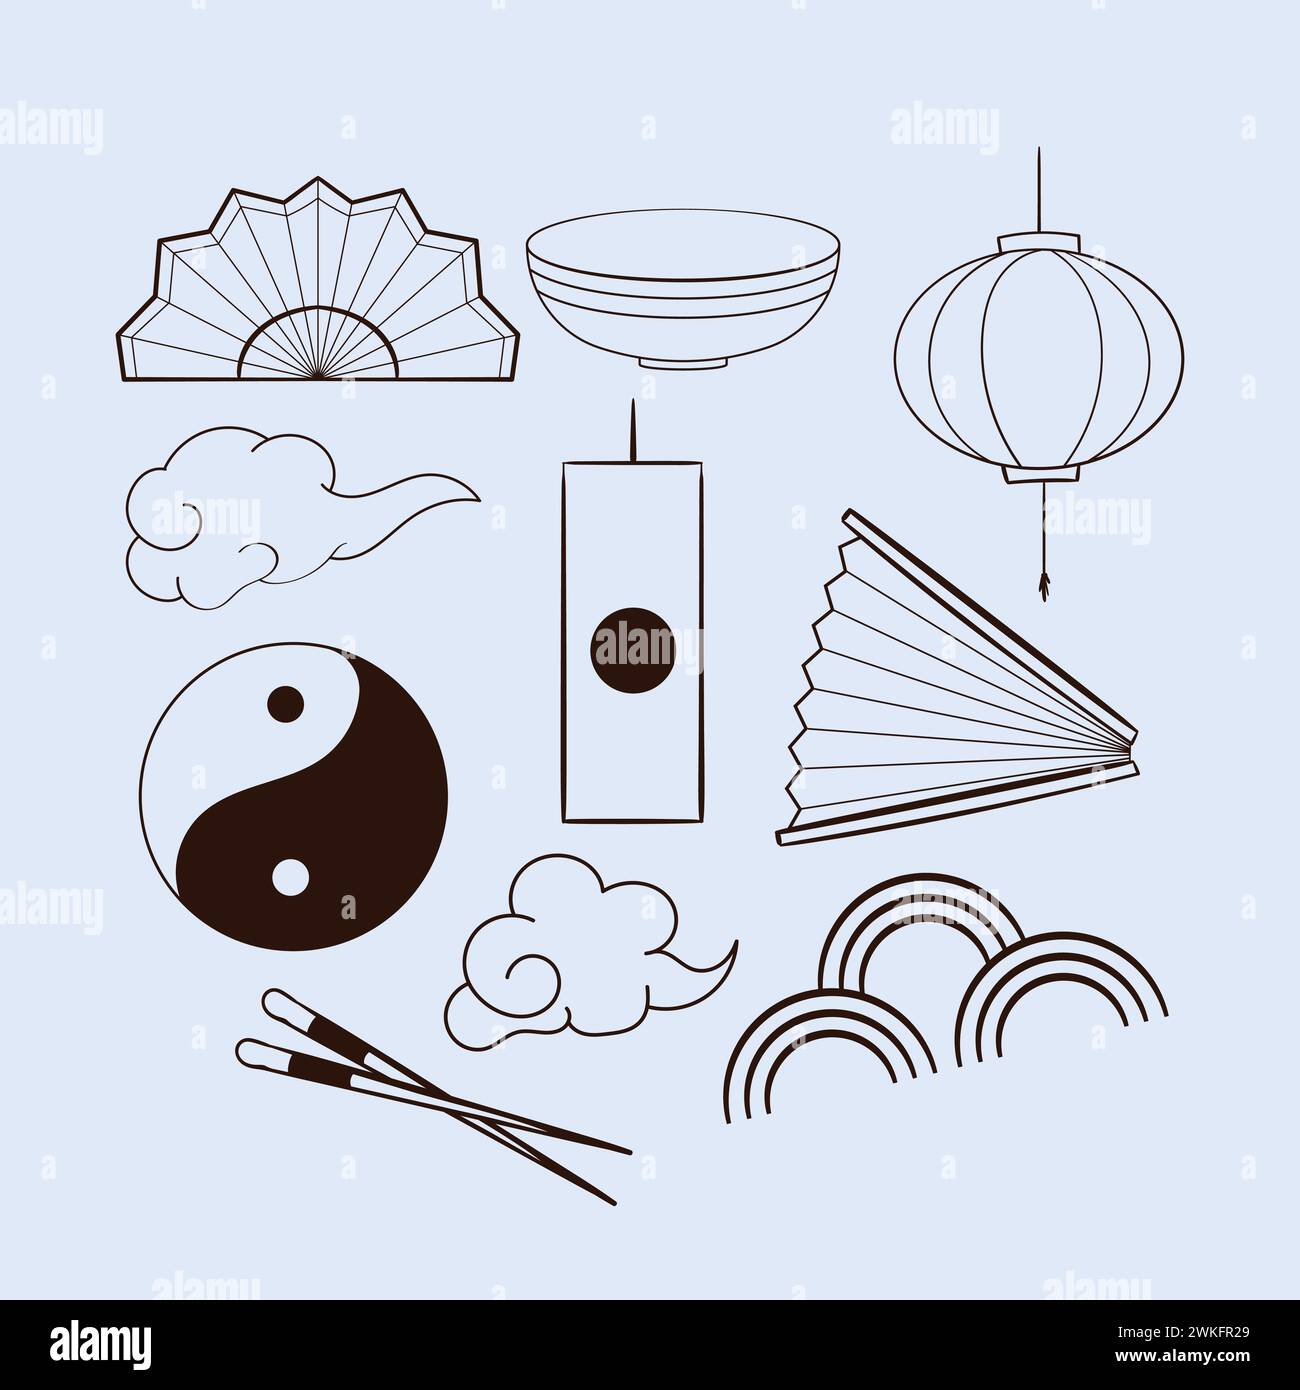 China Chinese Doodle Draw Illustration Vector Icons Chinese Symbol doodle Scribbles Stock Vector